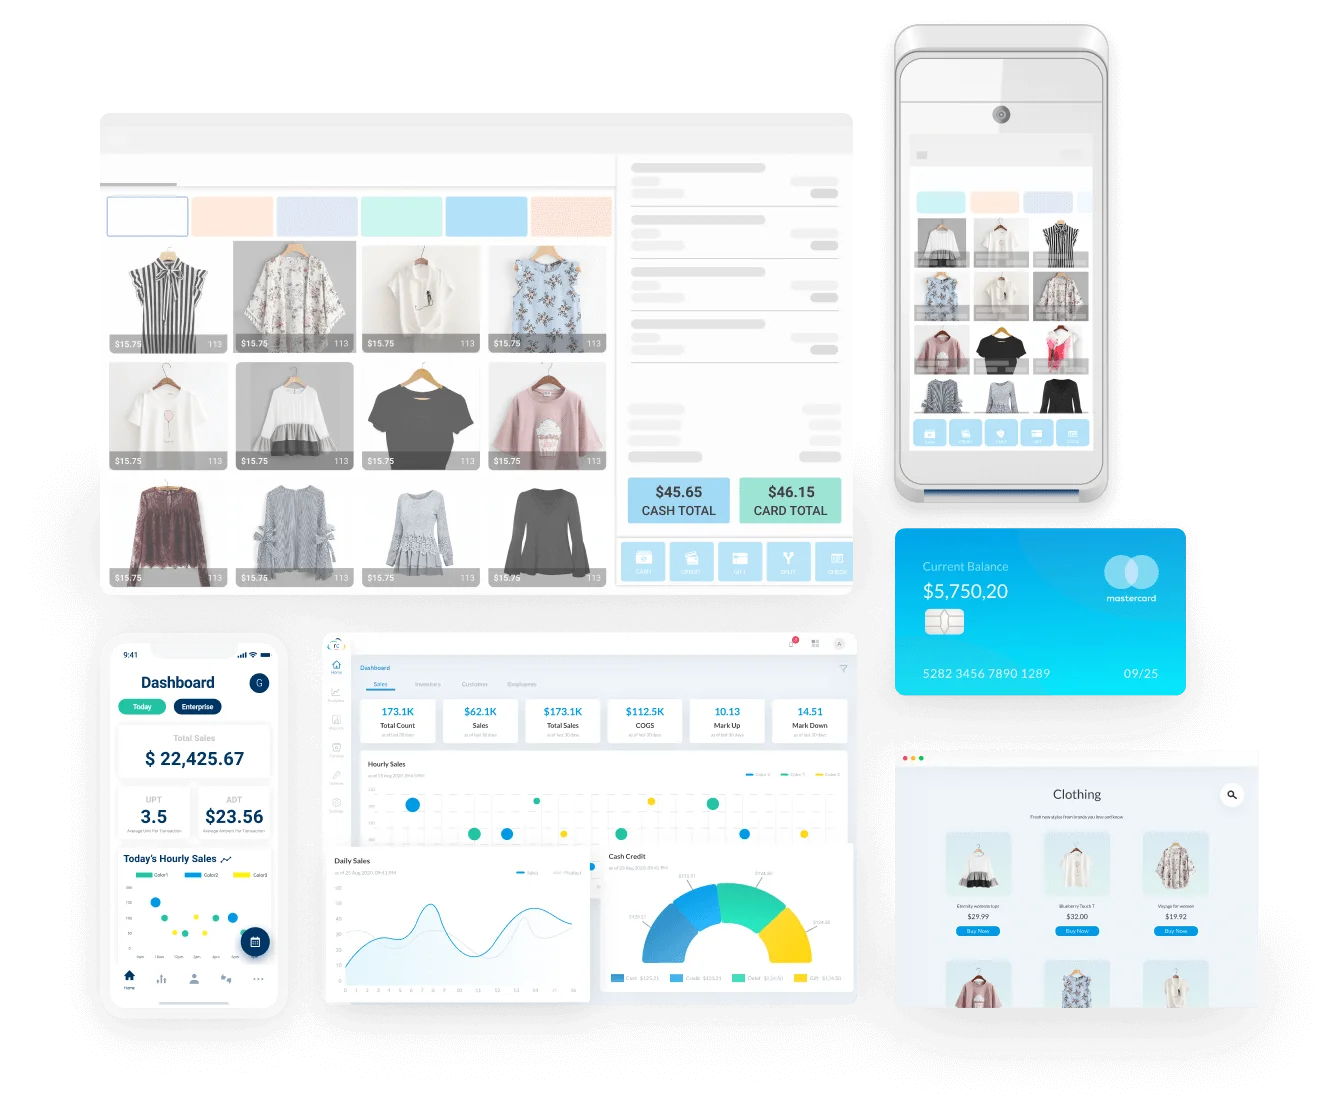 image contains screens of main retailcloud solutions